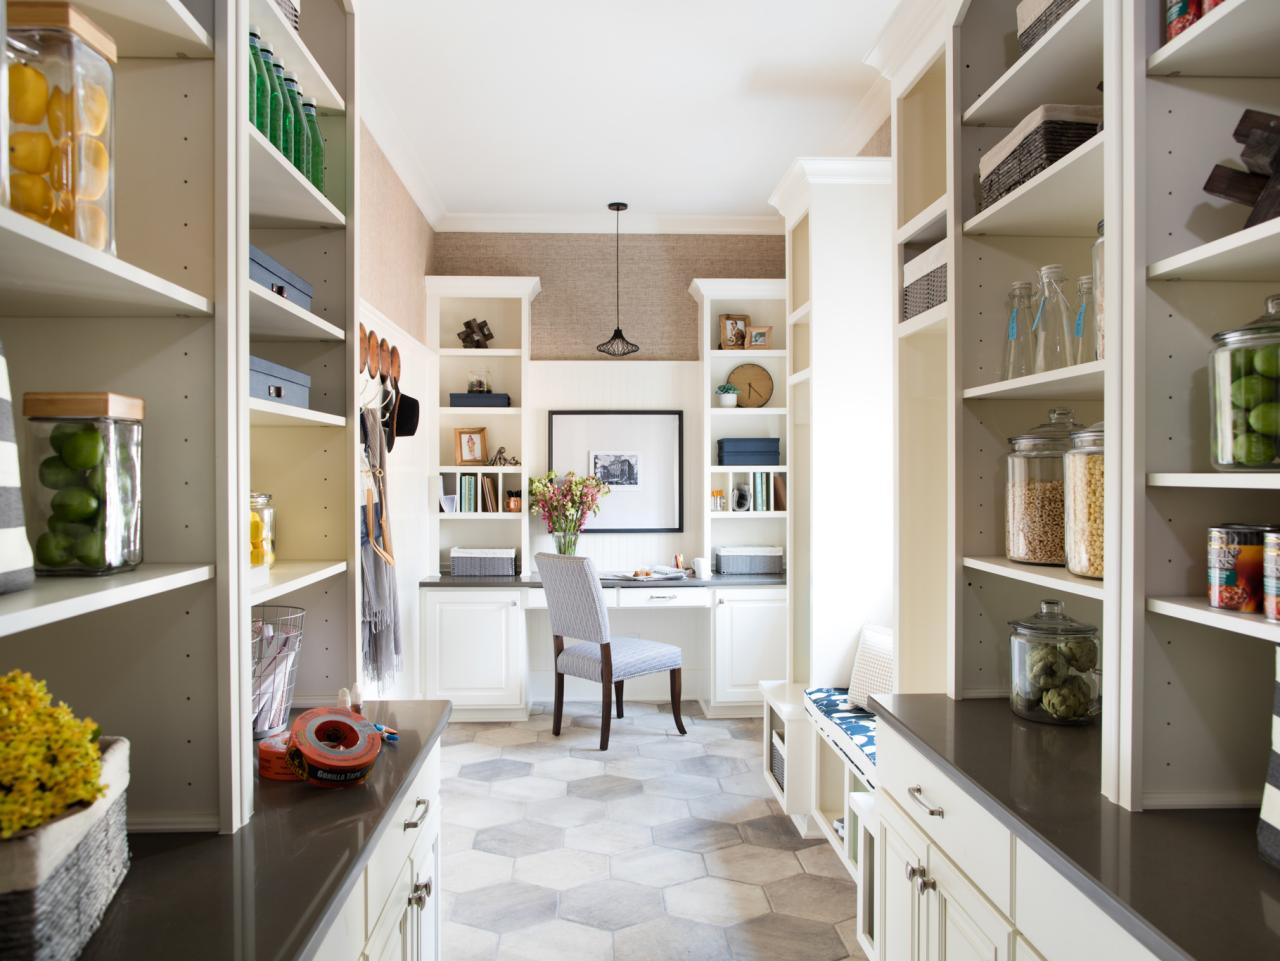 Kitchen Remodel: What's Trending in Pantry Design?